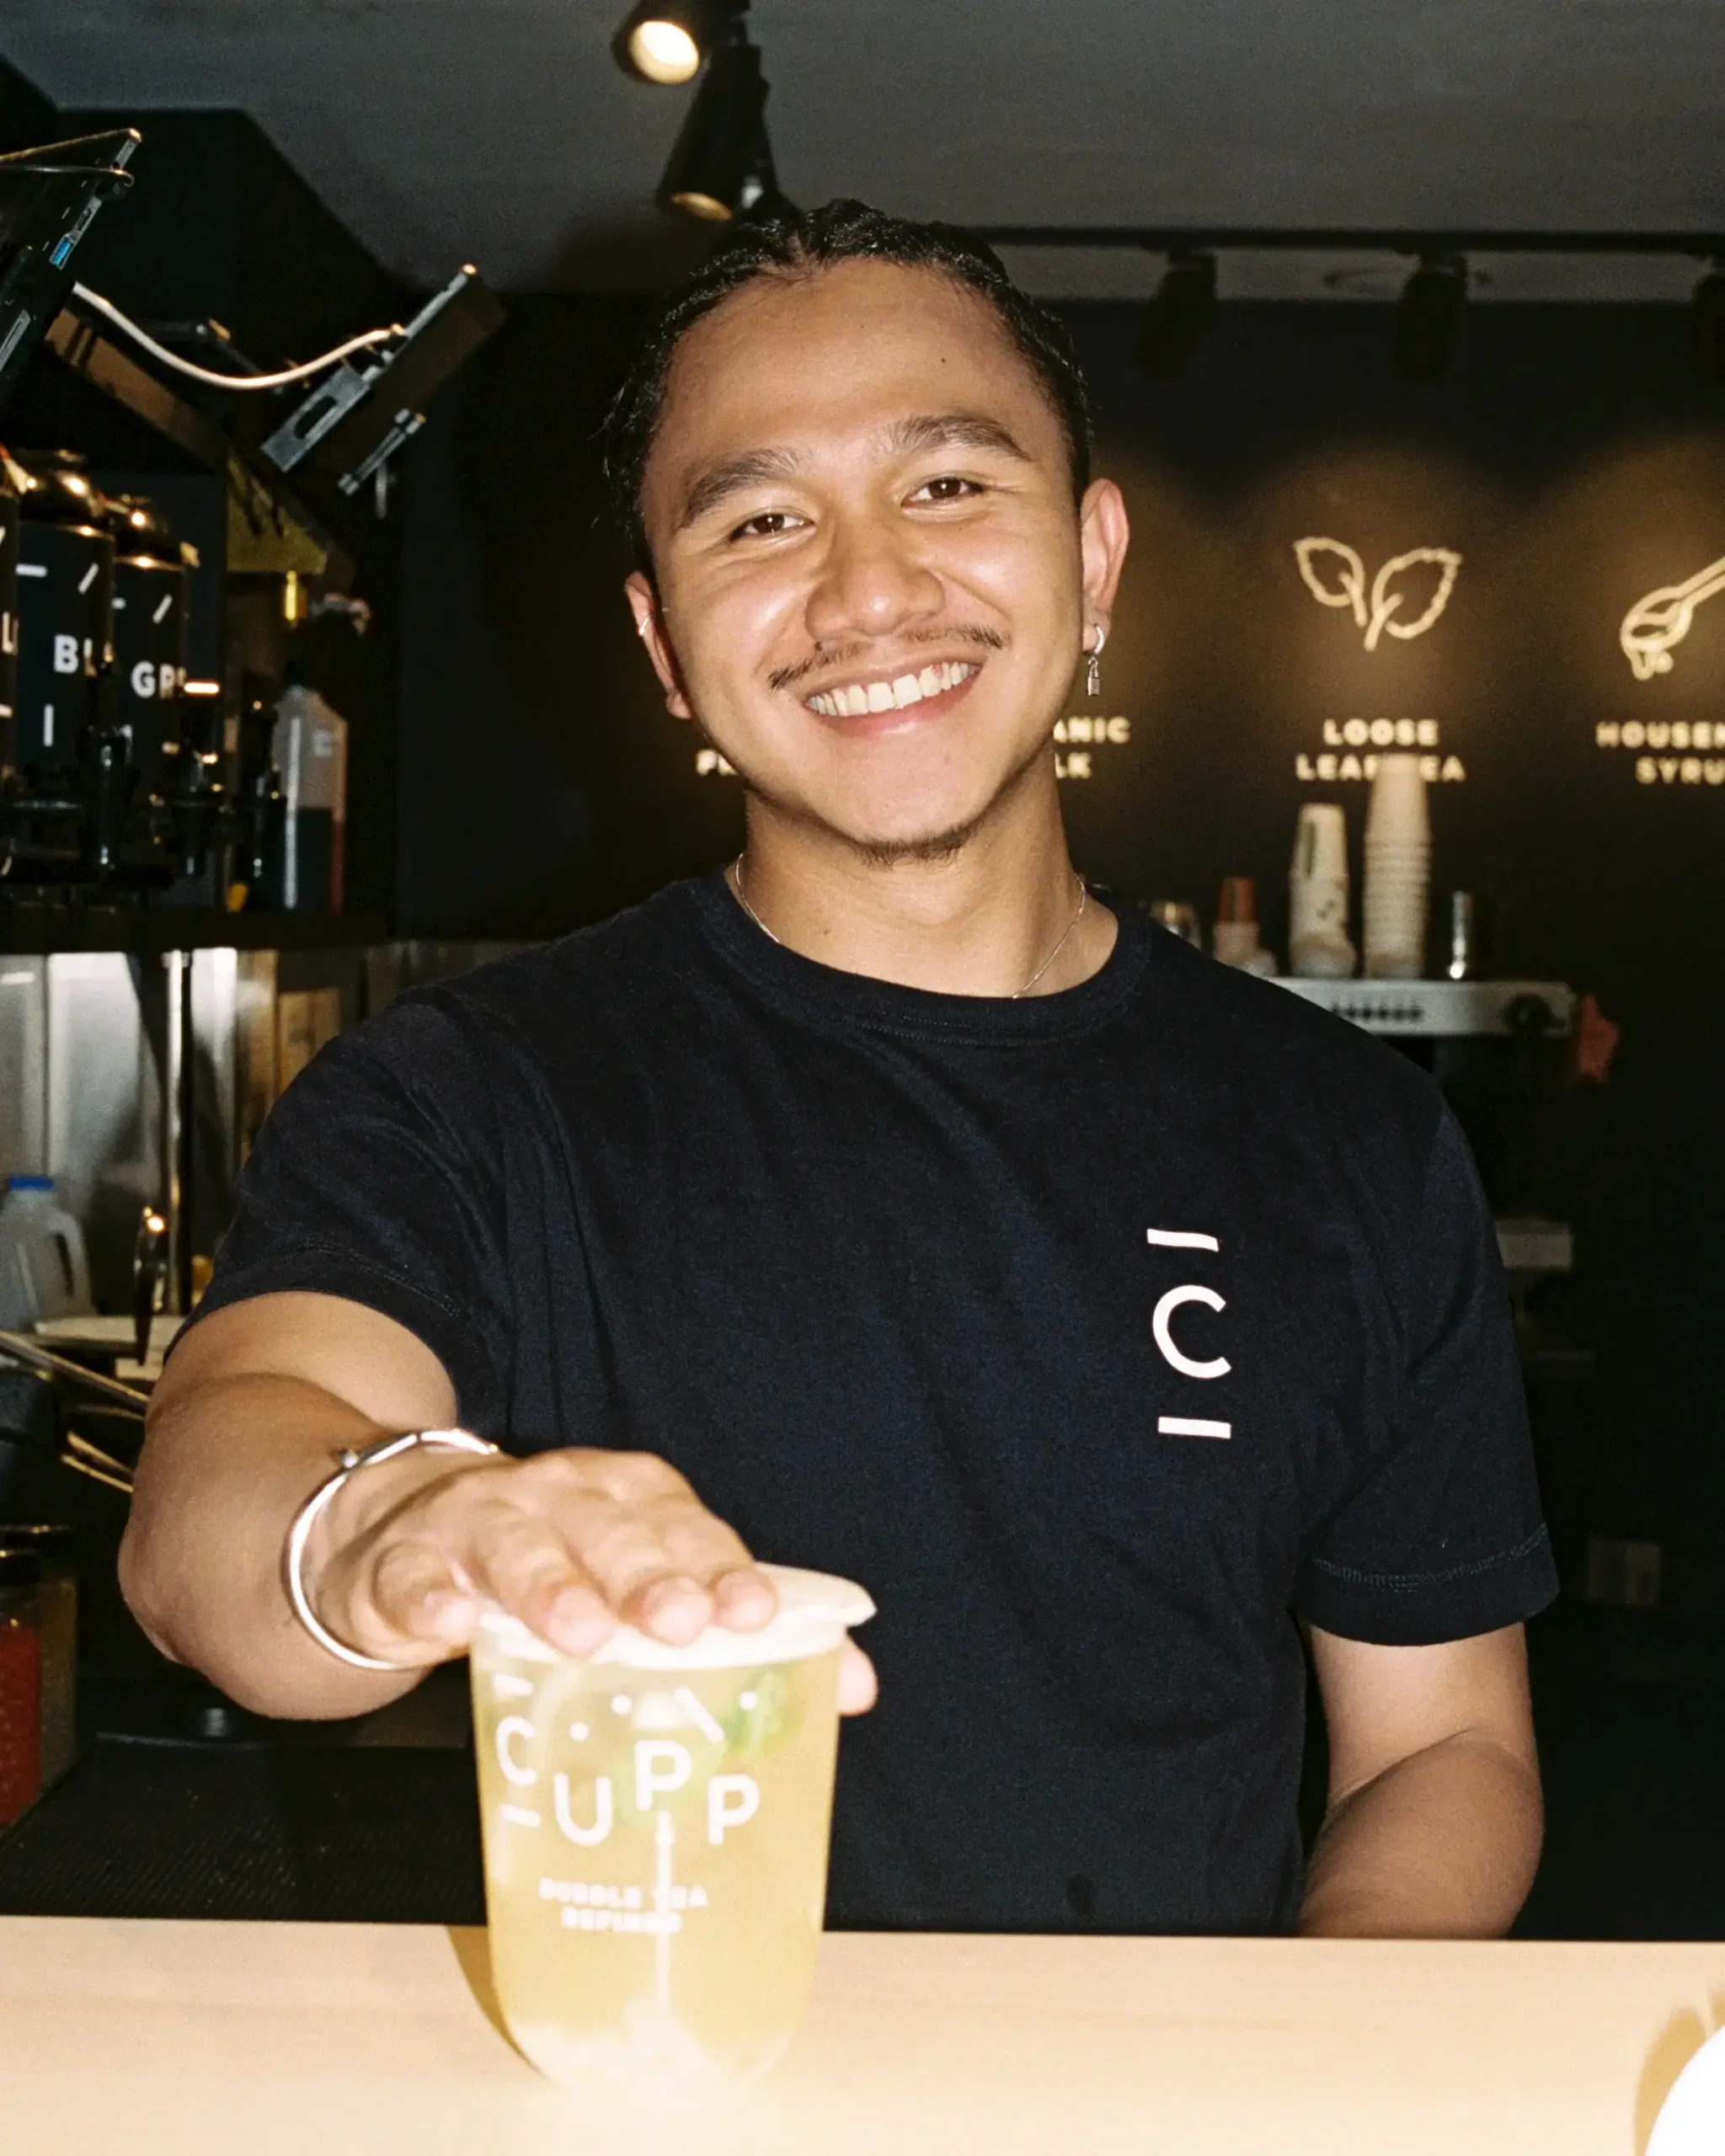 Hospitality employee smiling at the camera and handing a drink to a customer